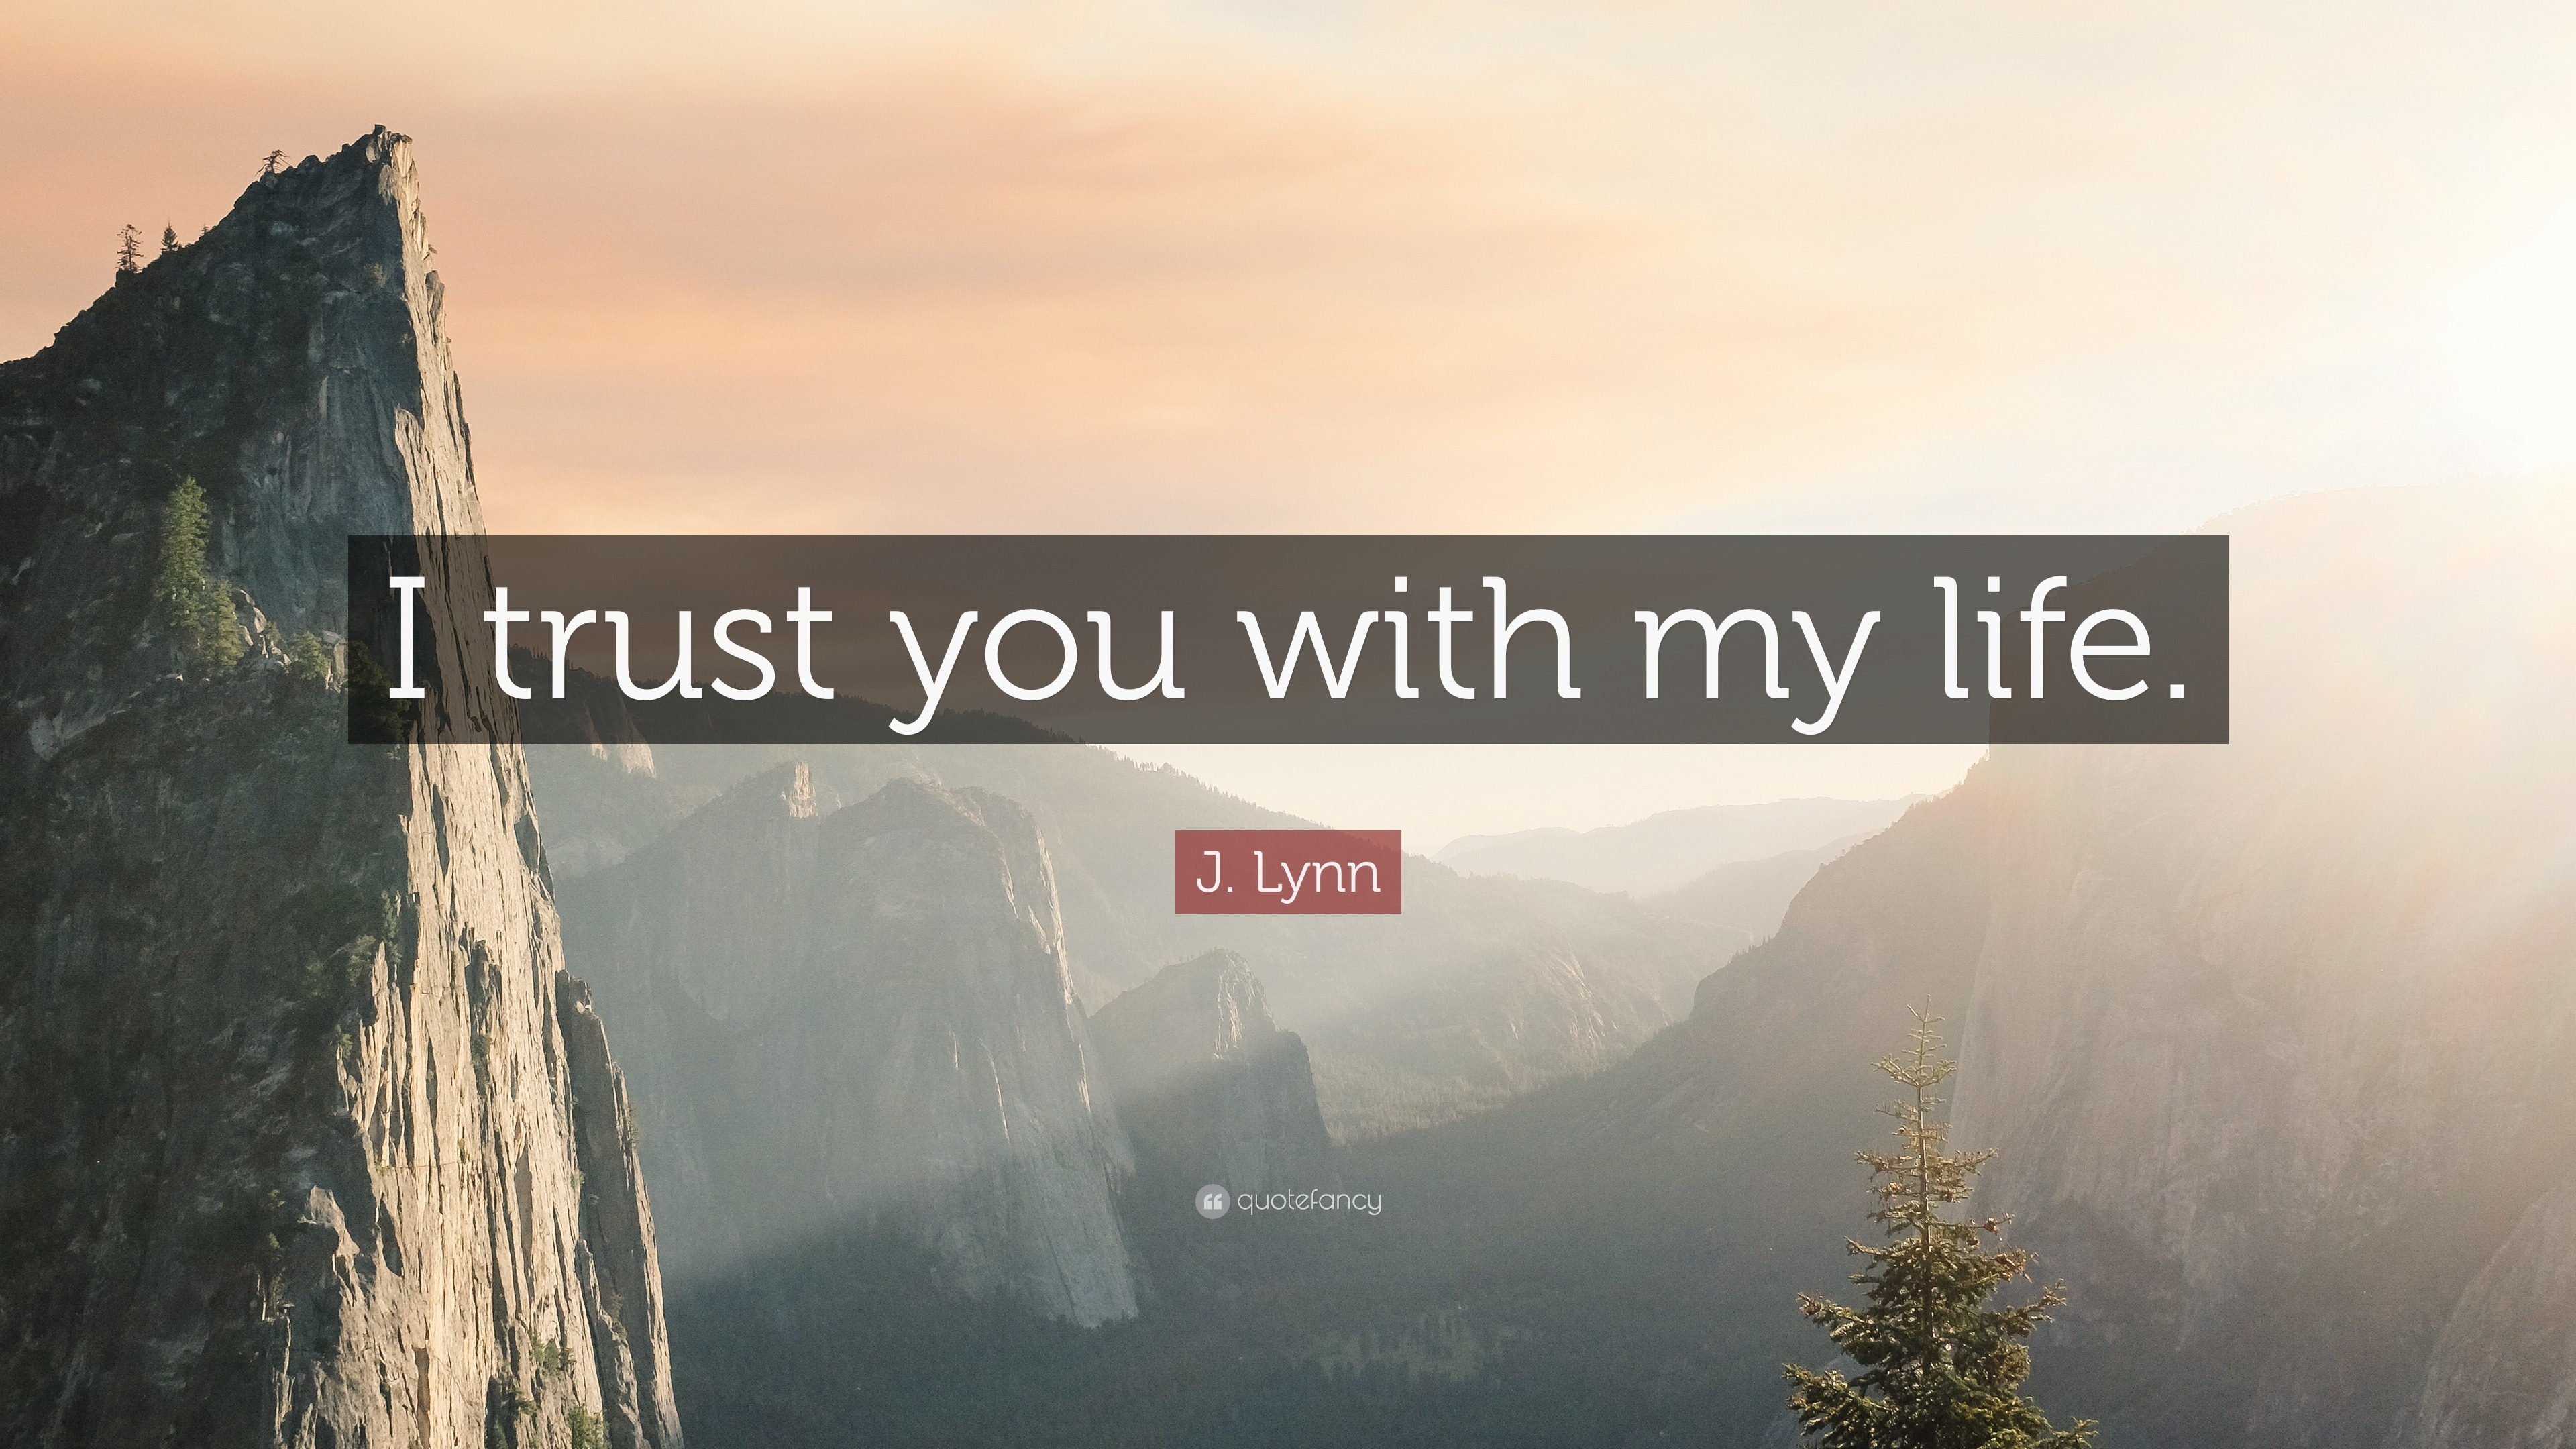 J Lynn Quote “I trust you with my life ”